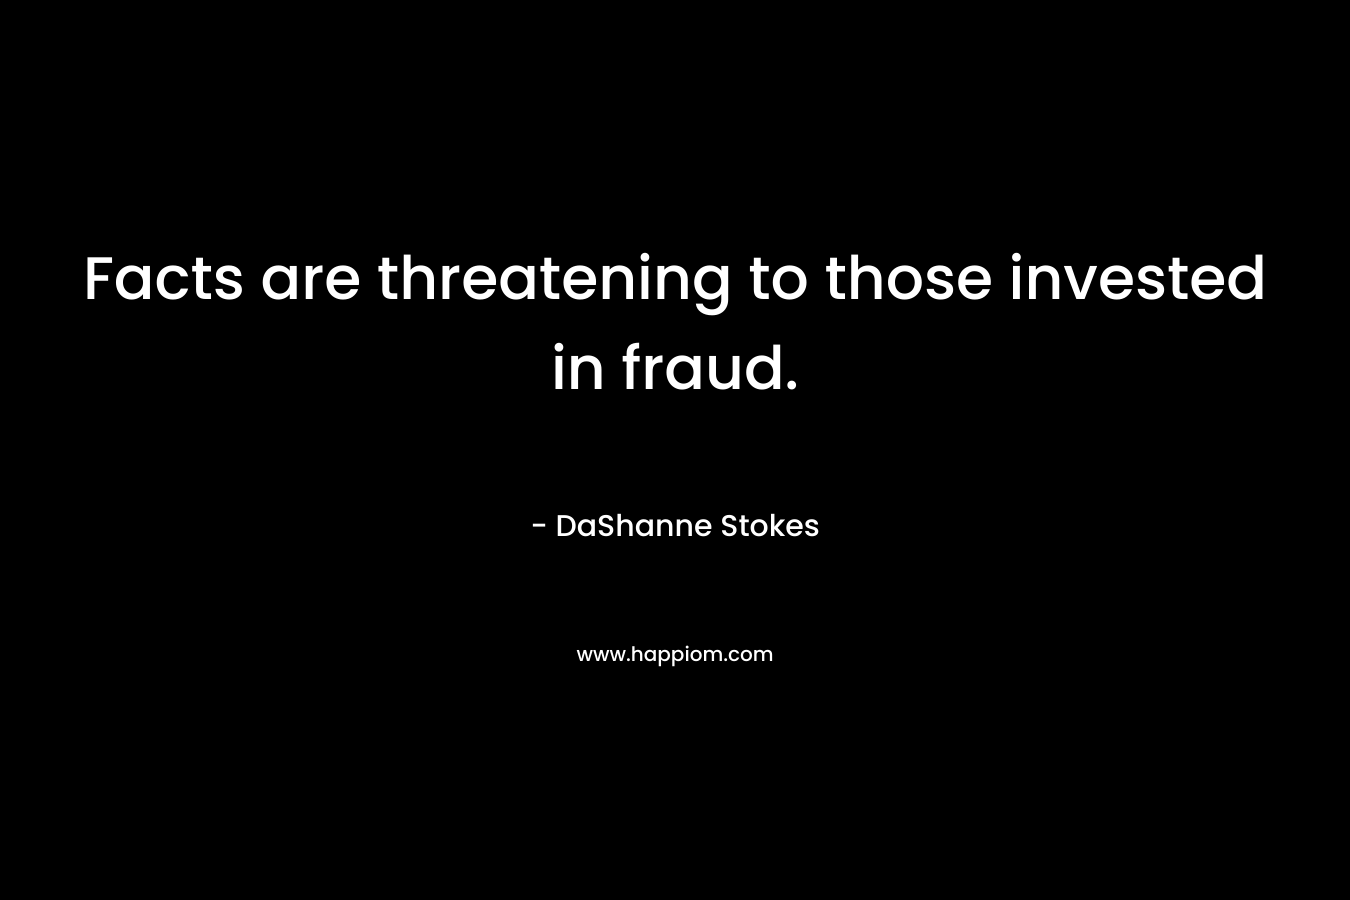 Facts are threatening to those invested in fraud.